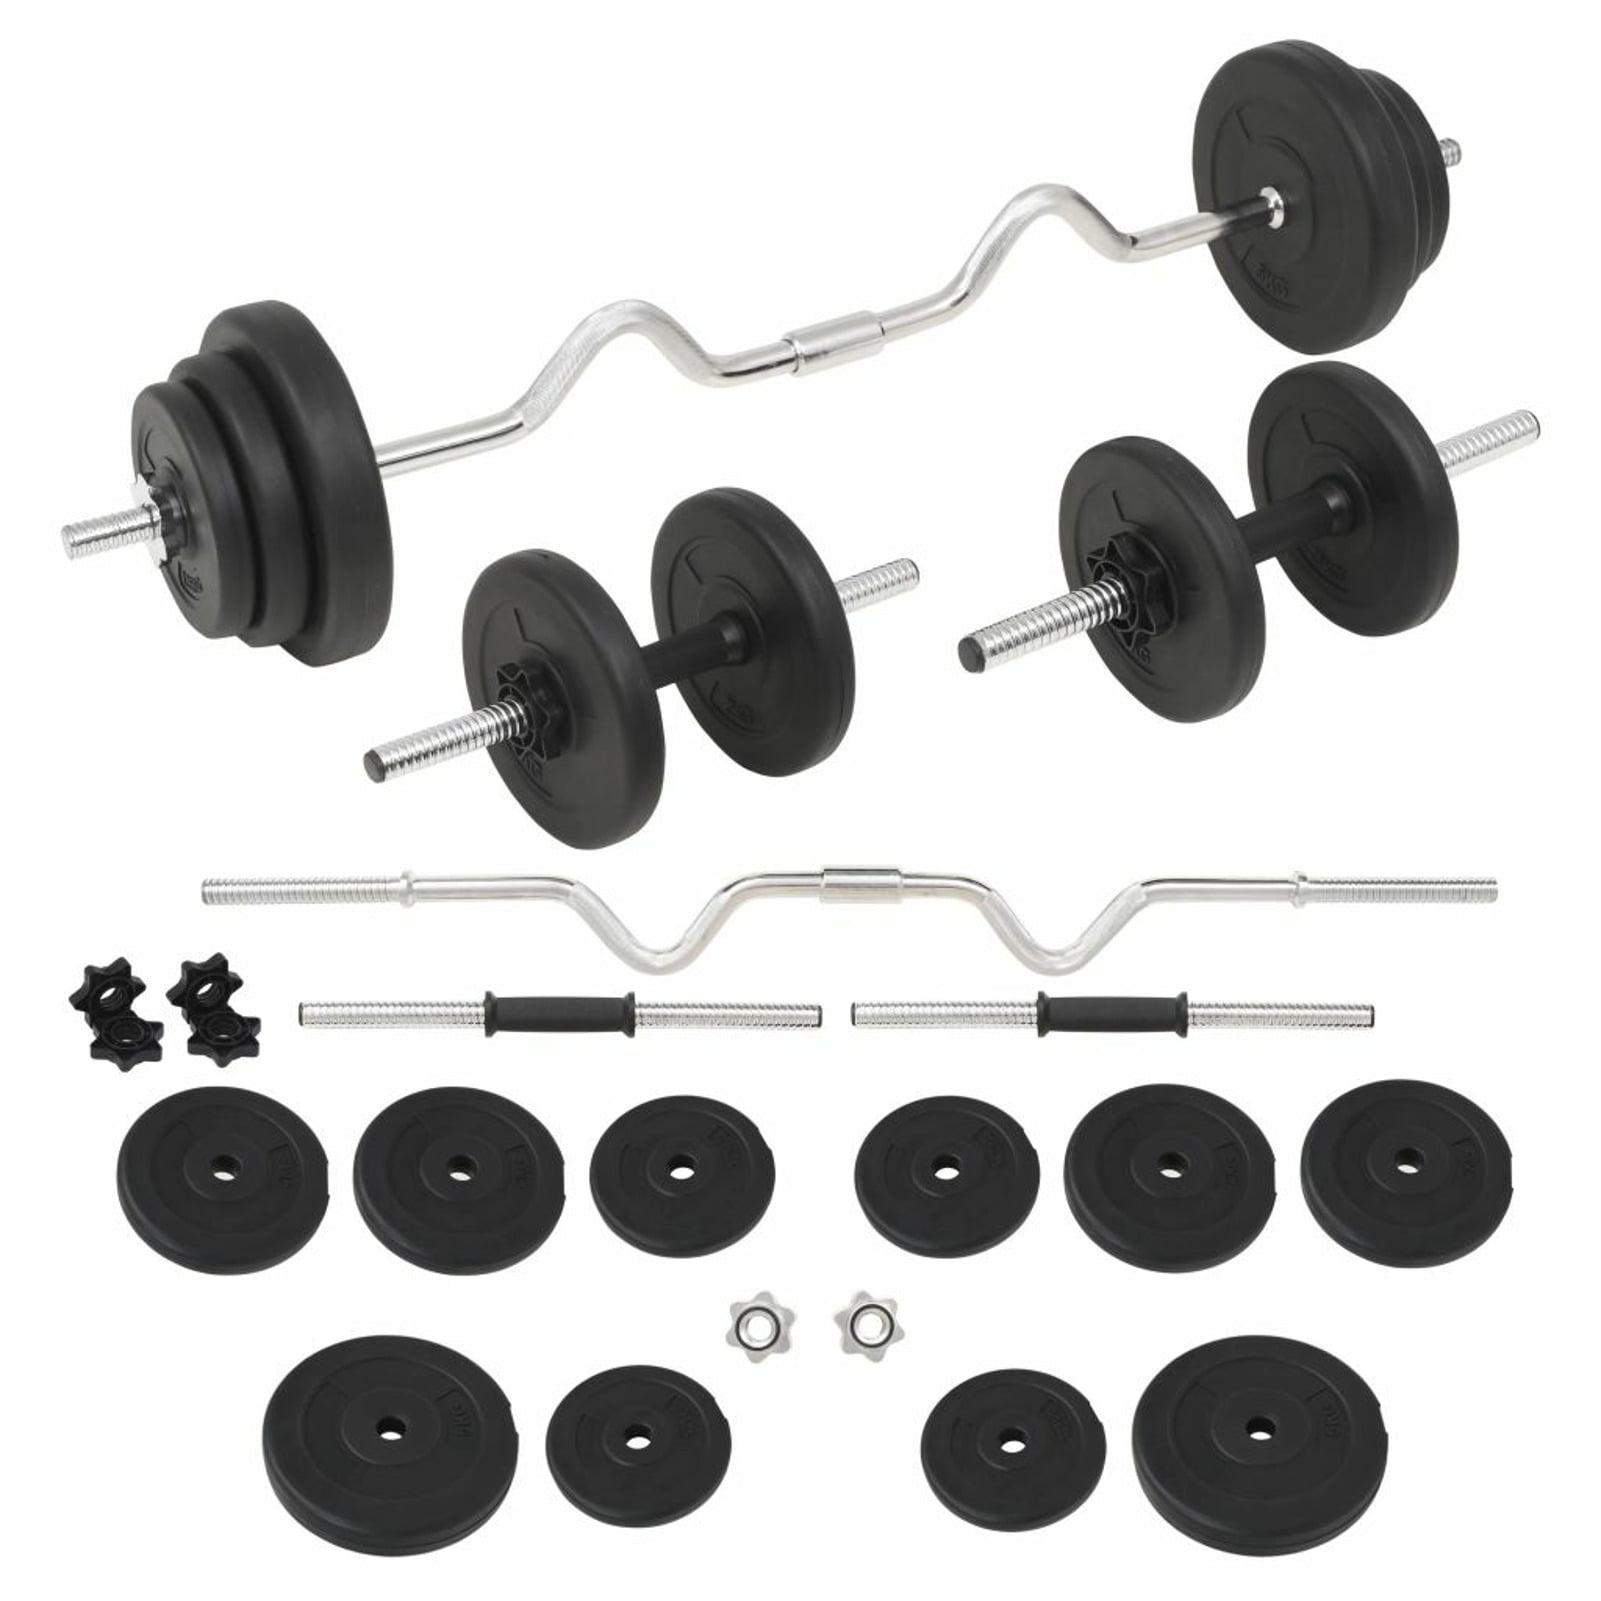 Details about   Gym Adjustable Weight Dumbbell Set Cap Barbell Plates Body Workout Total 5-66LB 